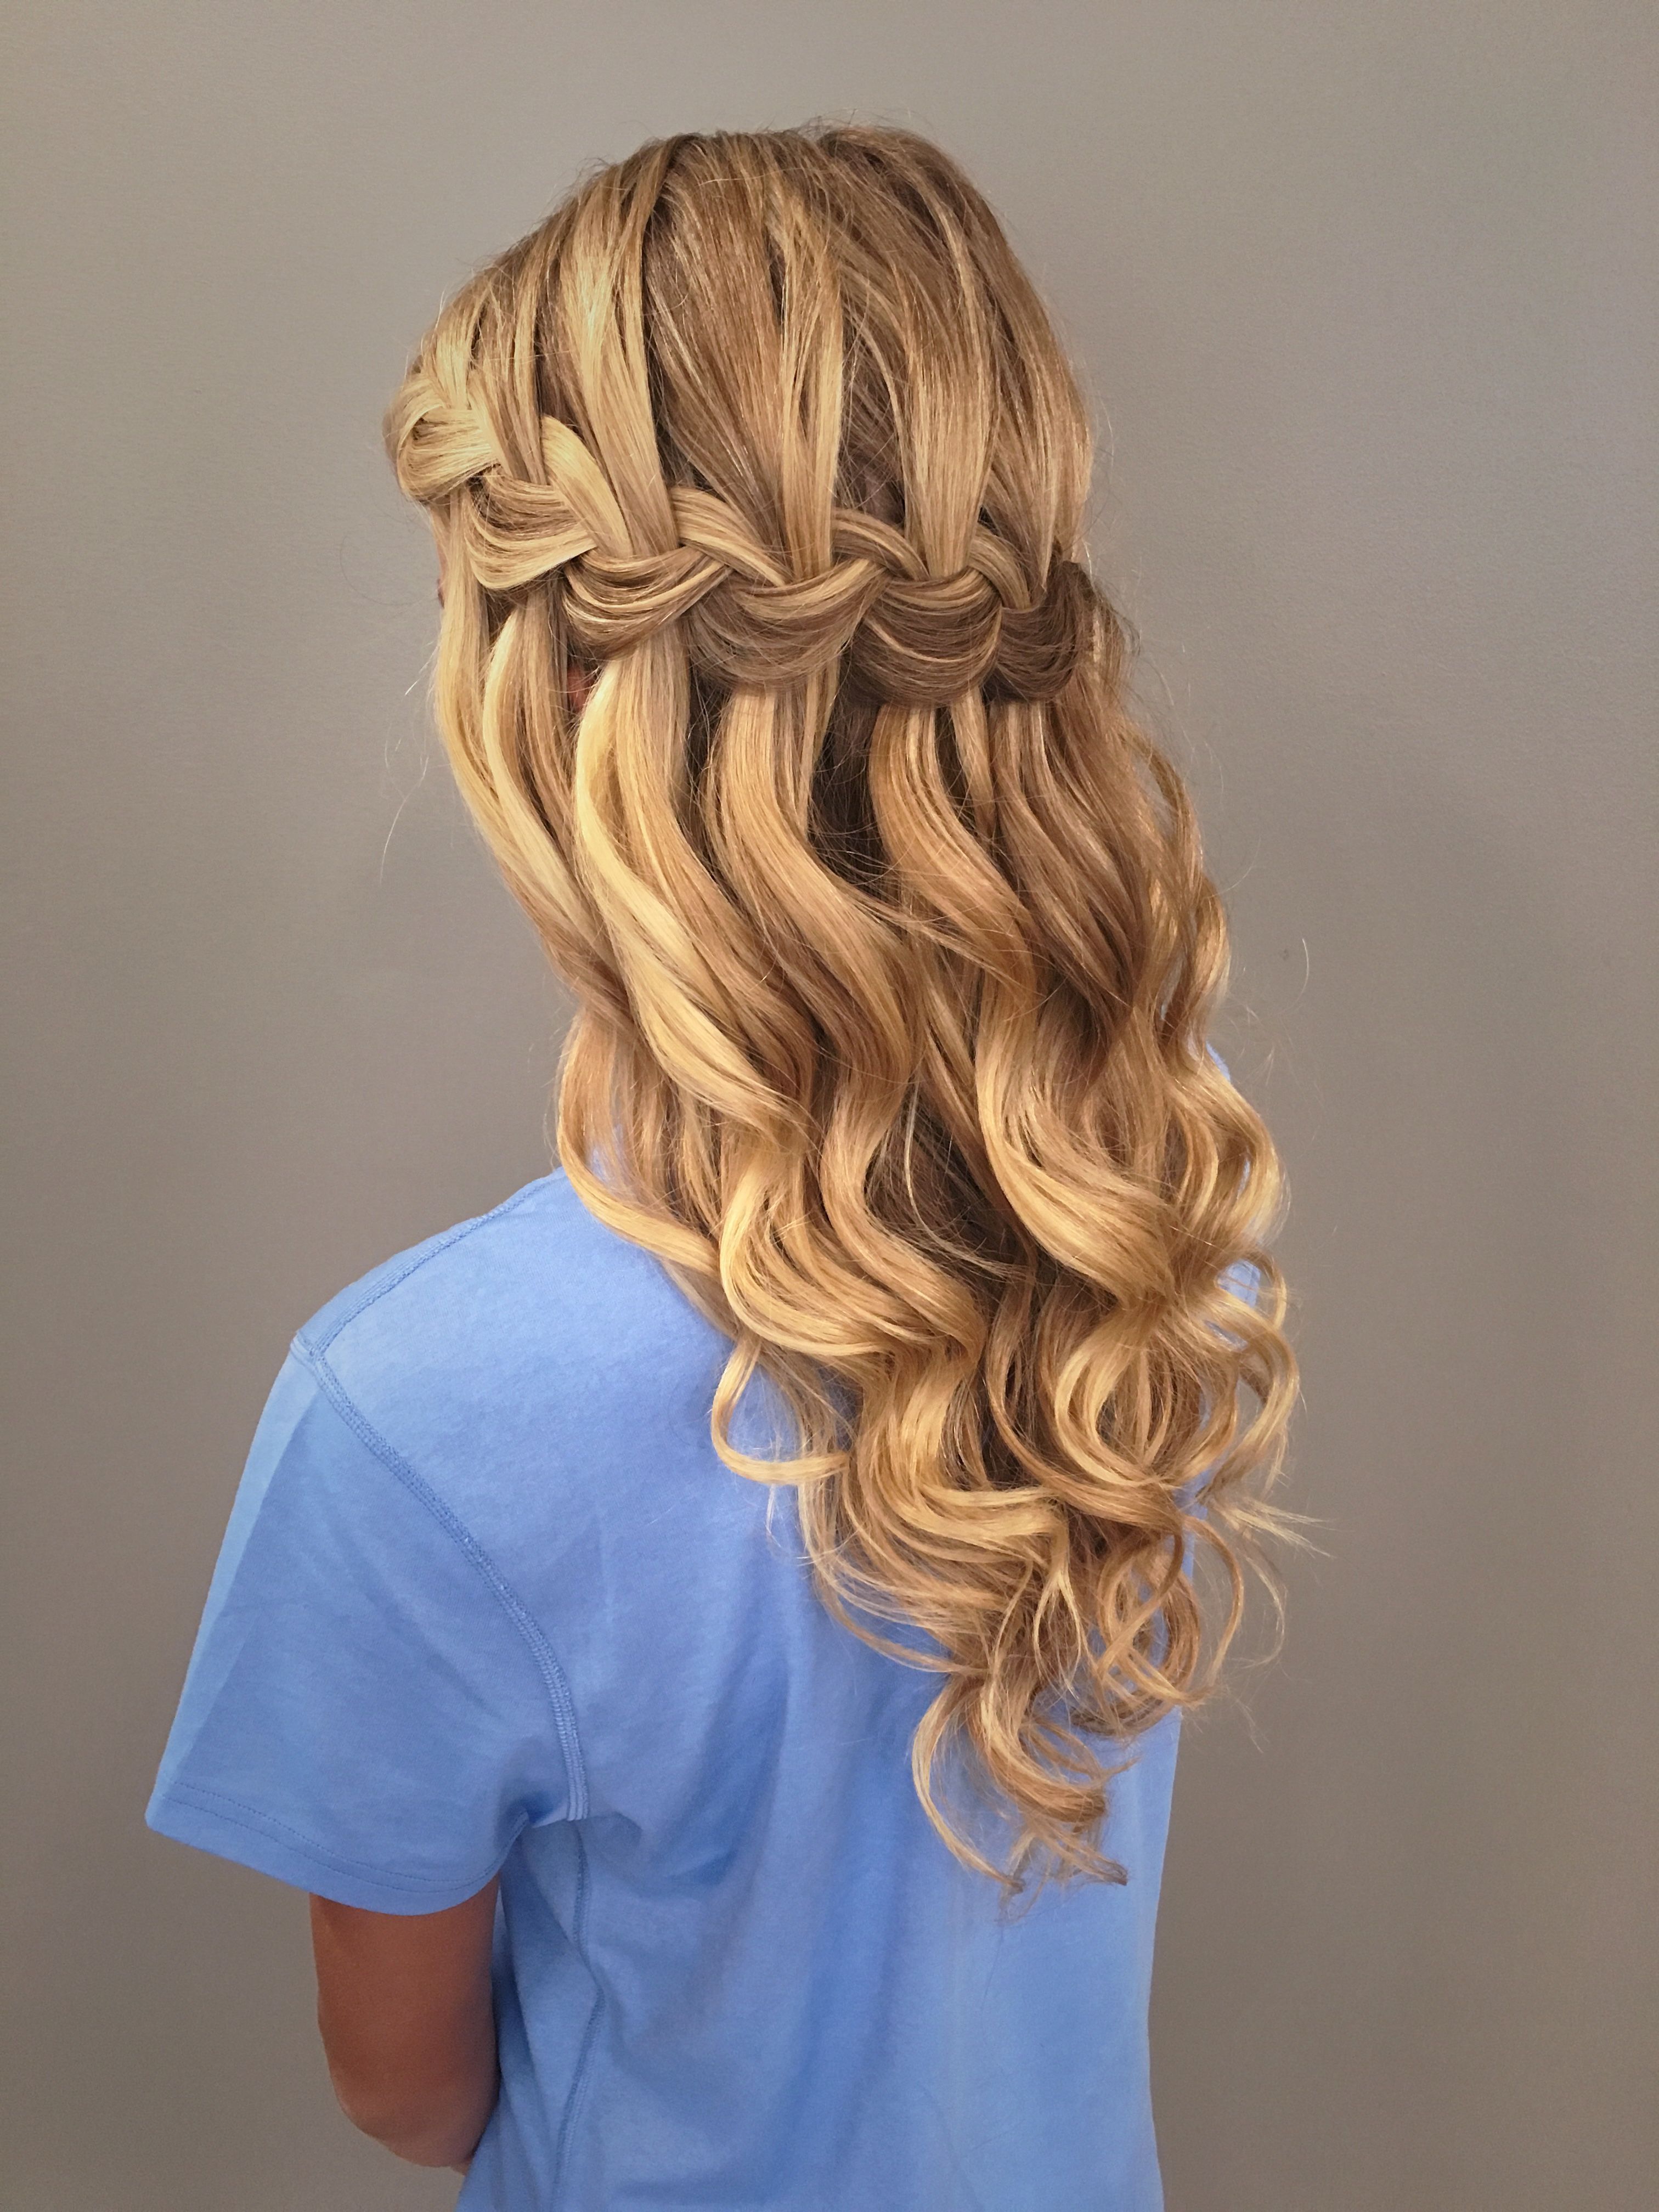 Most Recent Natural Looking Braided Hairstyles For Brides With Regard To Waterfall Braid With Mermaid Waves! Great Bridal, Prom, Or (View 13 of 20)